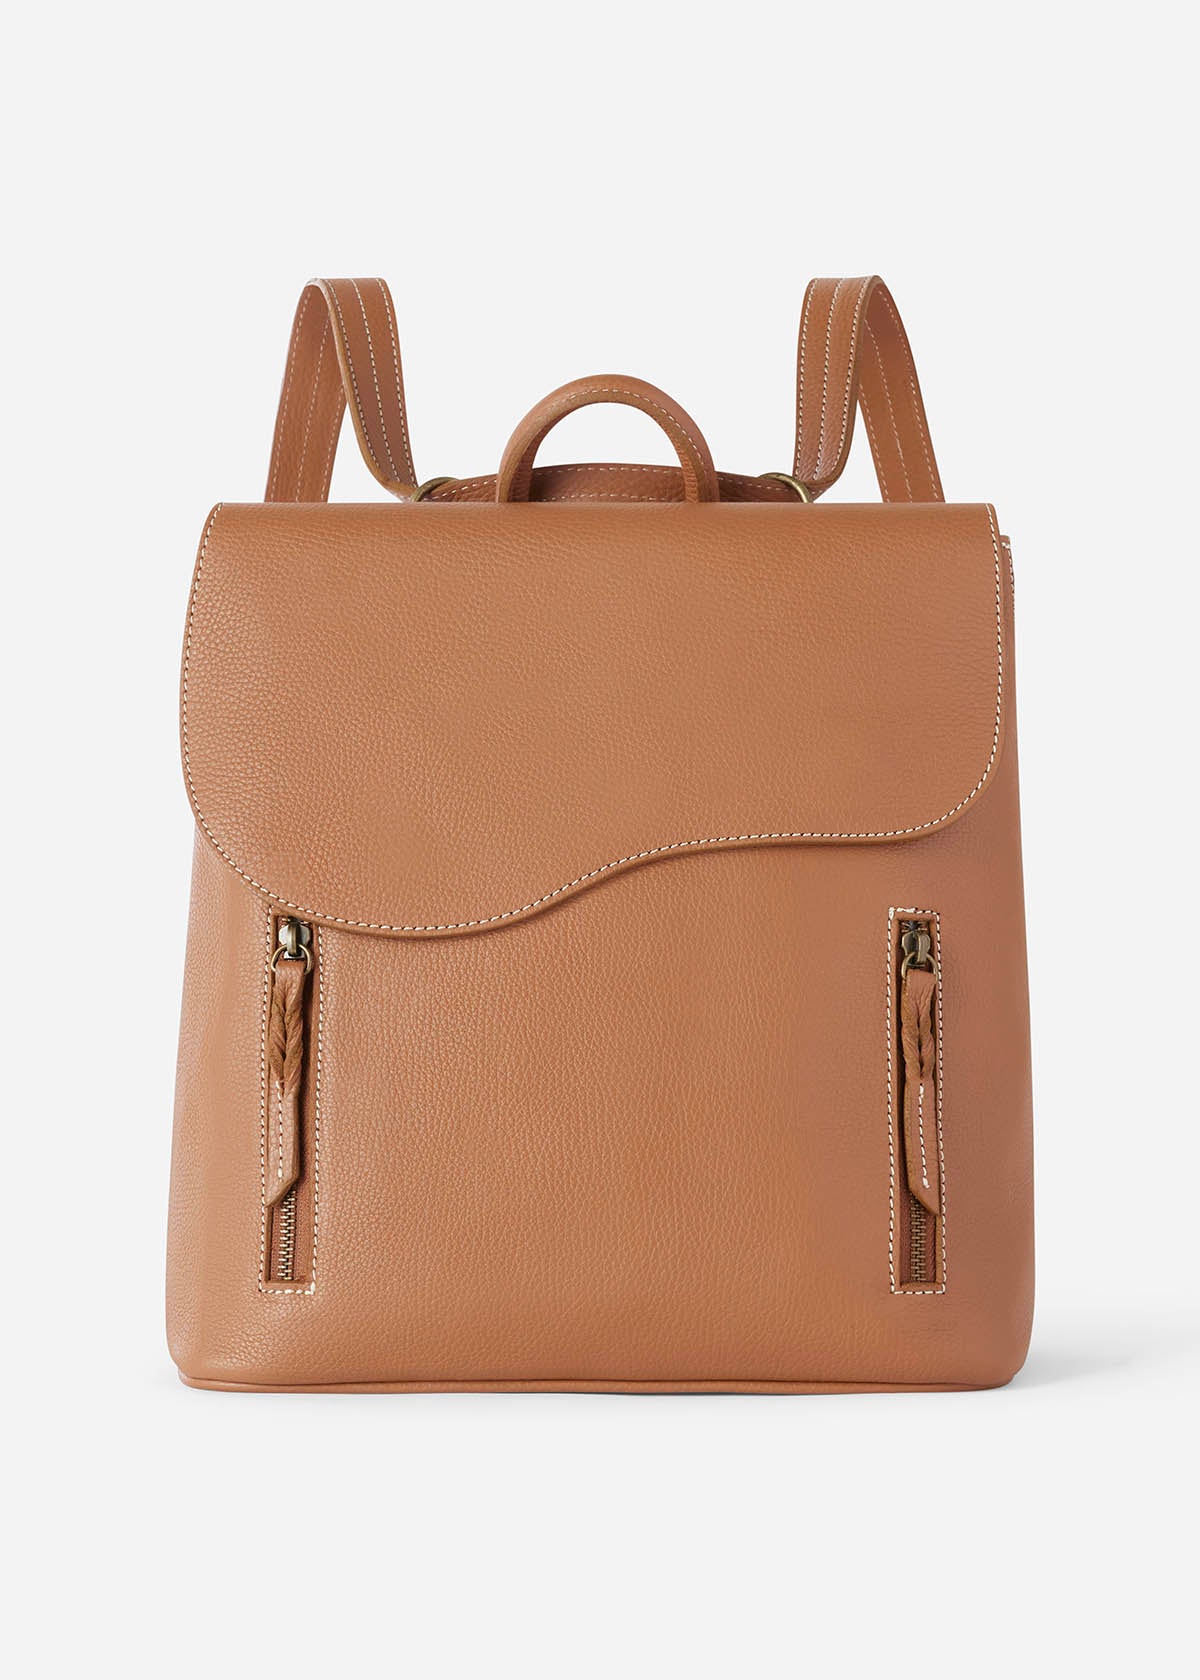 Bronzed Caramel::variant::Oughton Paddock Convertible Backpack Purse